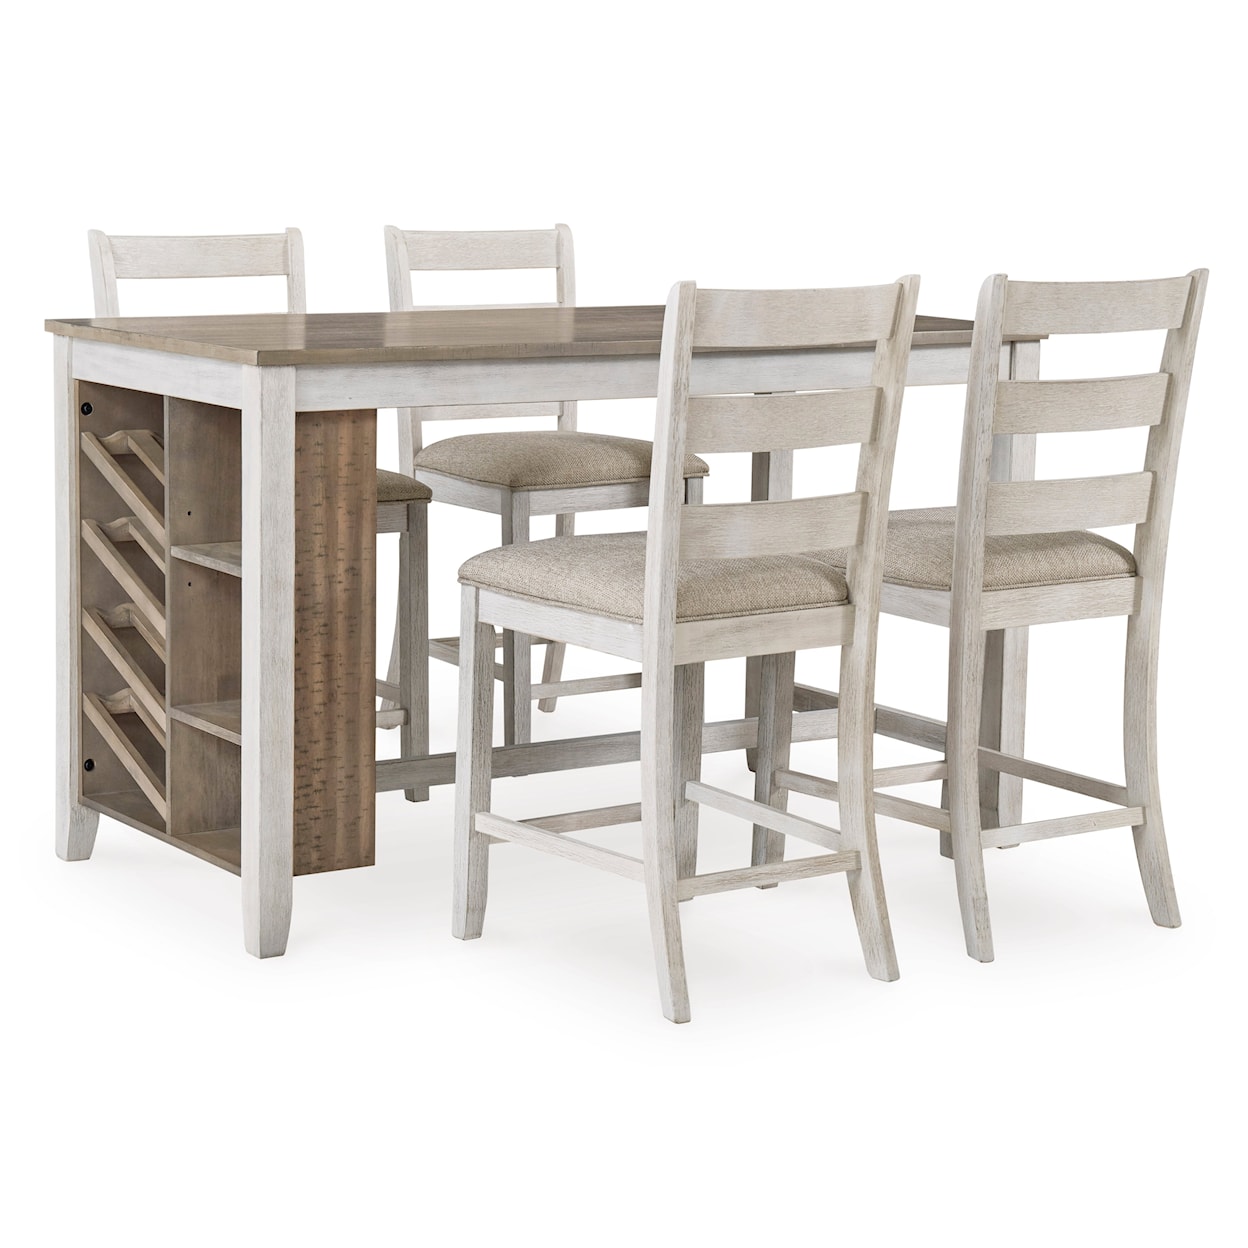 Signature Design by Ashley Skempton 5 Piece Counter Height Dining Set